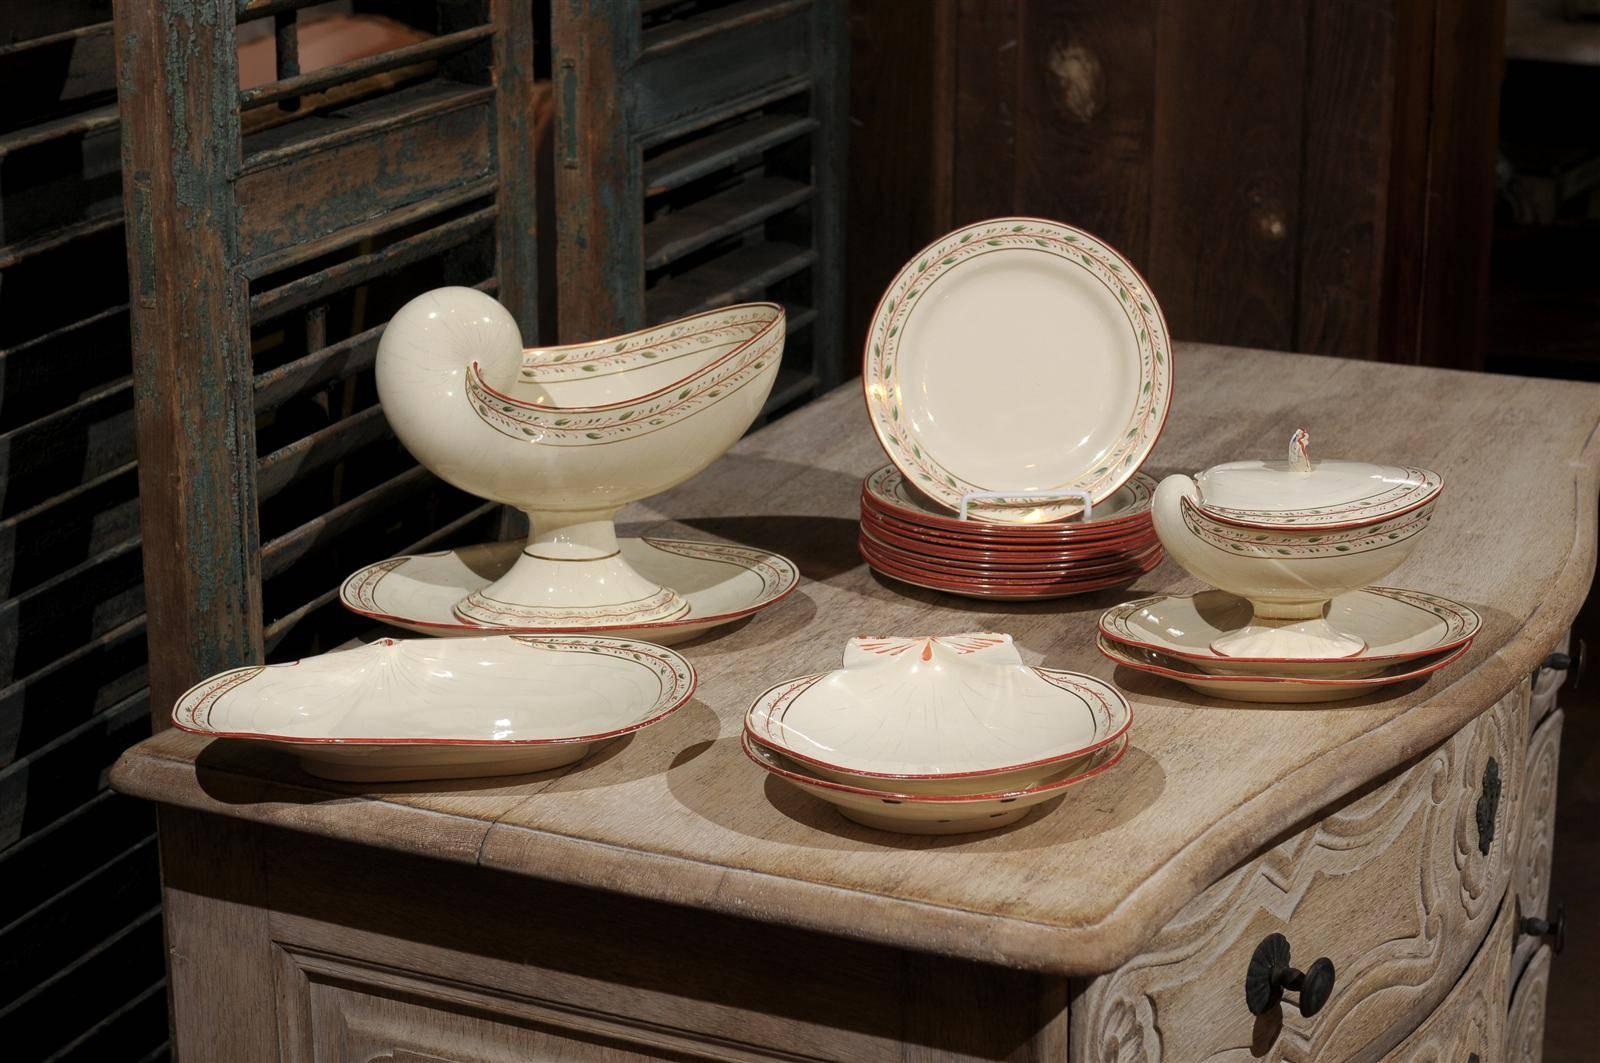 Early 19th century 20-piece wedgwood creamware seashell and seaweed set, includes: Two shell-form plates, four small clam shell platters (two larger than the others), one covered gravy boat, one large serving piece and 12 small dinner plates, maker